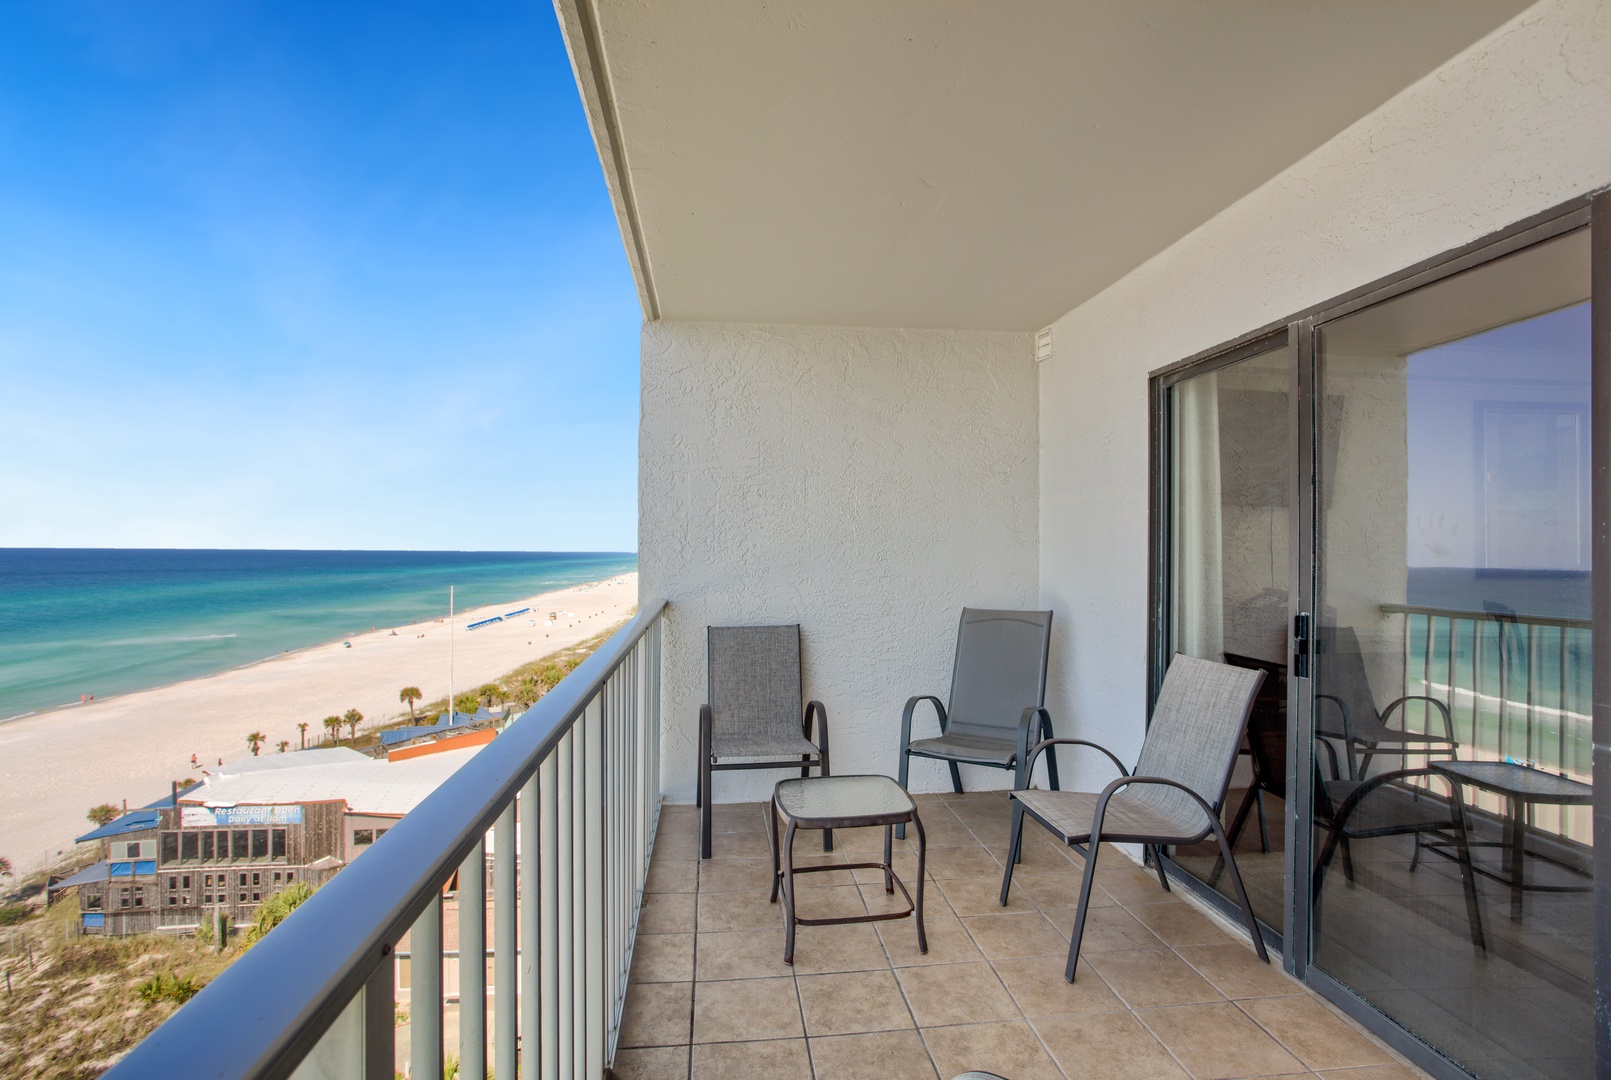 Take in the ocean breeze on your private balcony, enjoying outdoor seating and unbeatable views